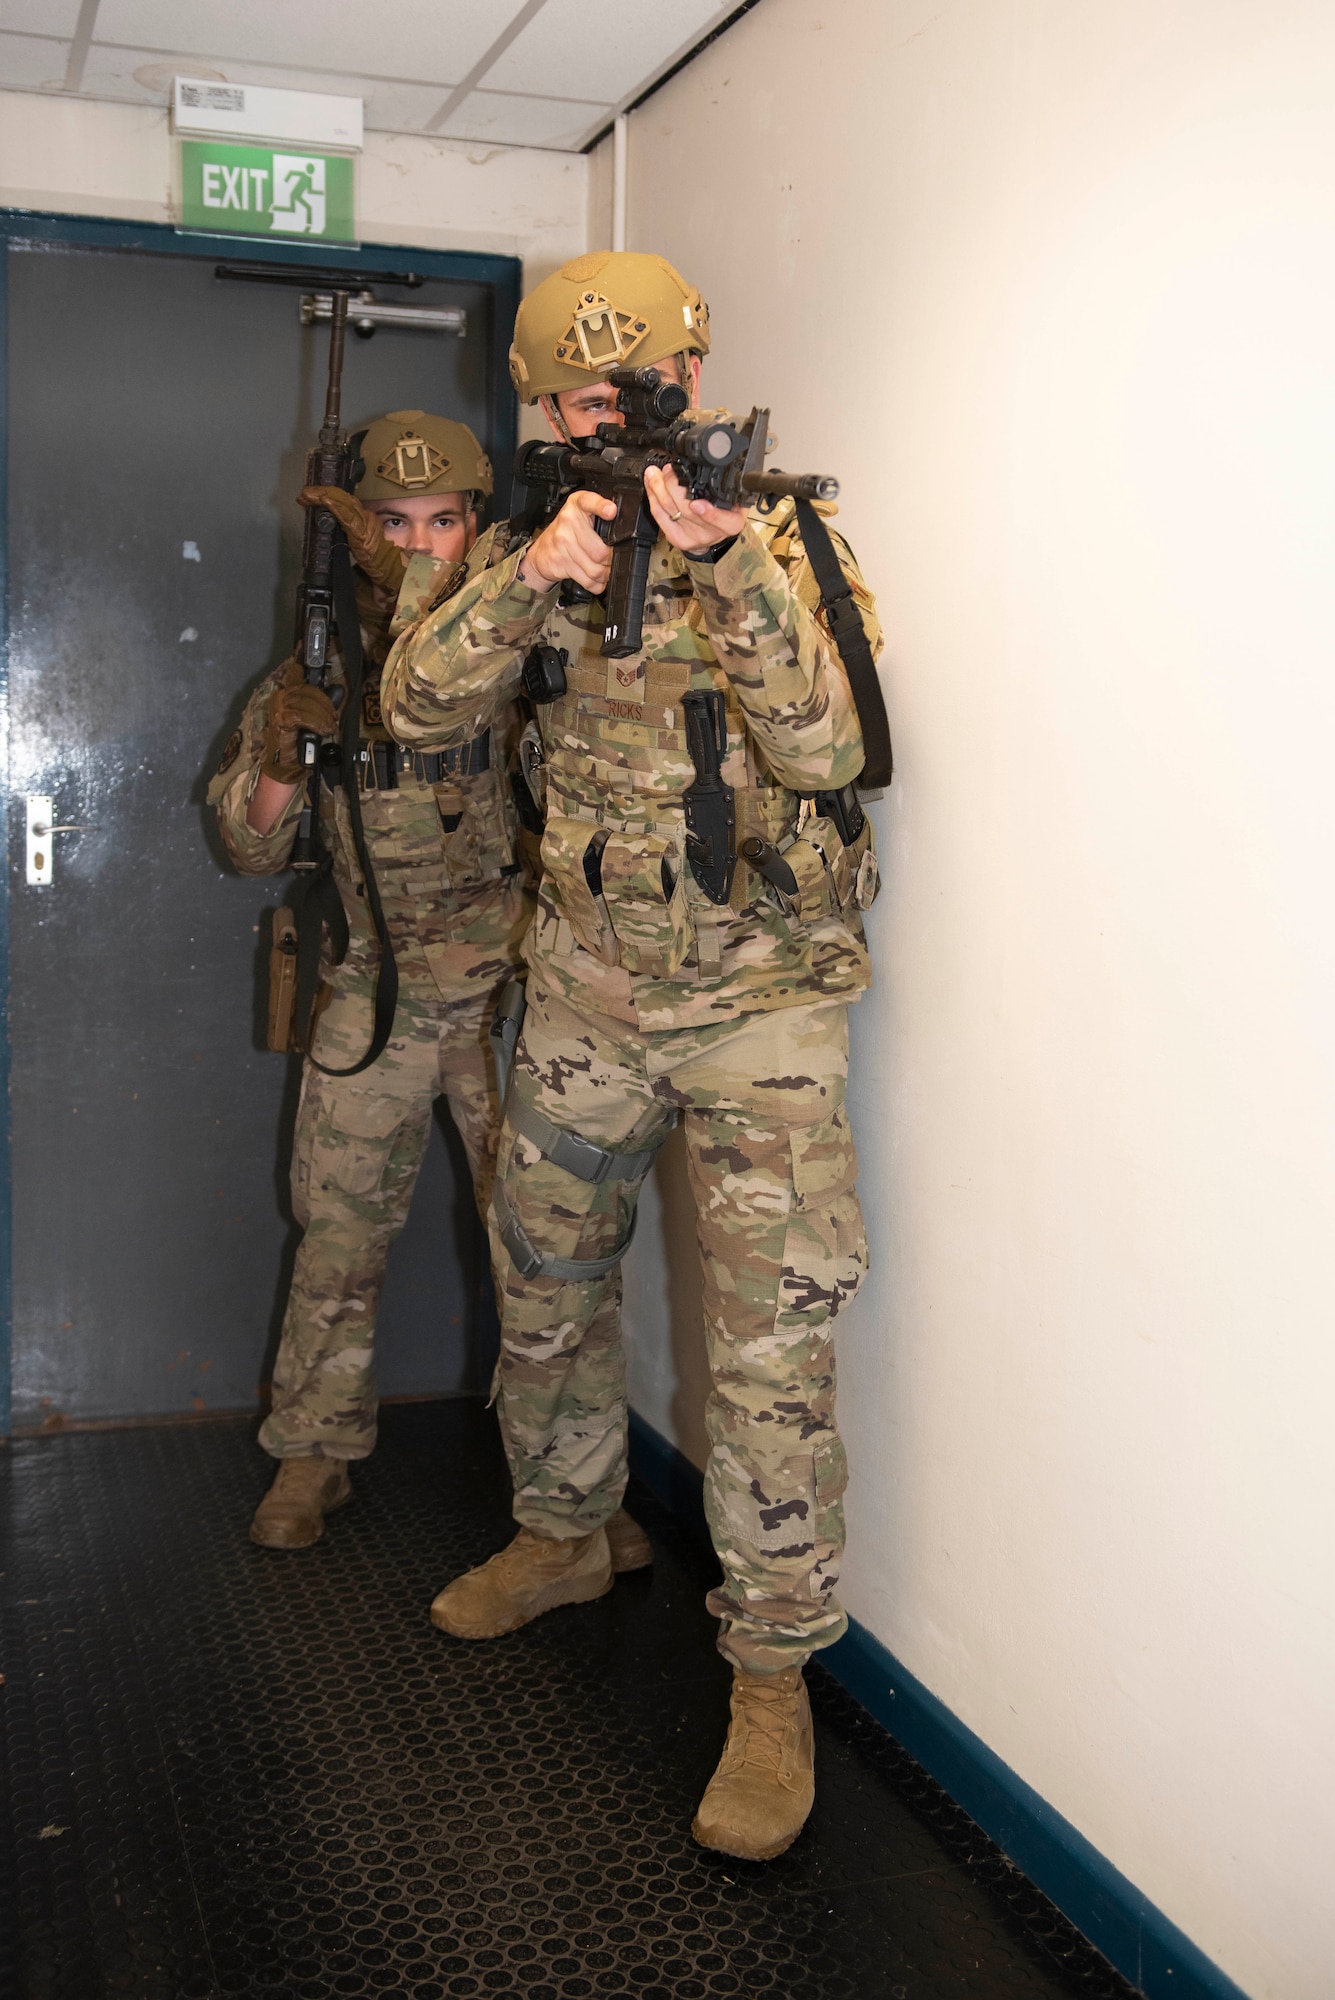 U.S. Air Force Senior Airman Josten Lacey, left, and Staff Sgt. Derek Ricks, right, 423rd Security Forces Squadron (SFS) patrolmen, clear a building during a simulated active shooter training at RAF Molesworth, England, July 28, 2020. 423rd SFS defenders conduct regular training and exercises to ensure mission readiness. (U.S. Air Force photo by Airman 1st Class Jennifer Zima)